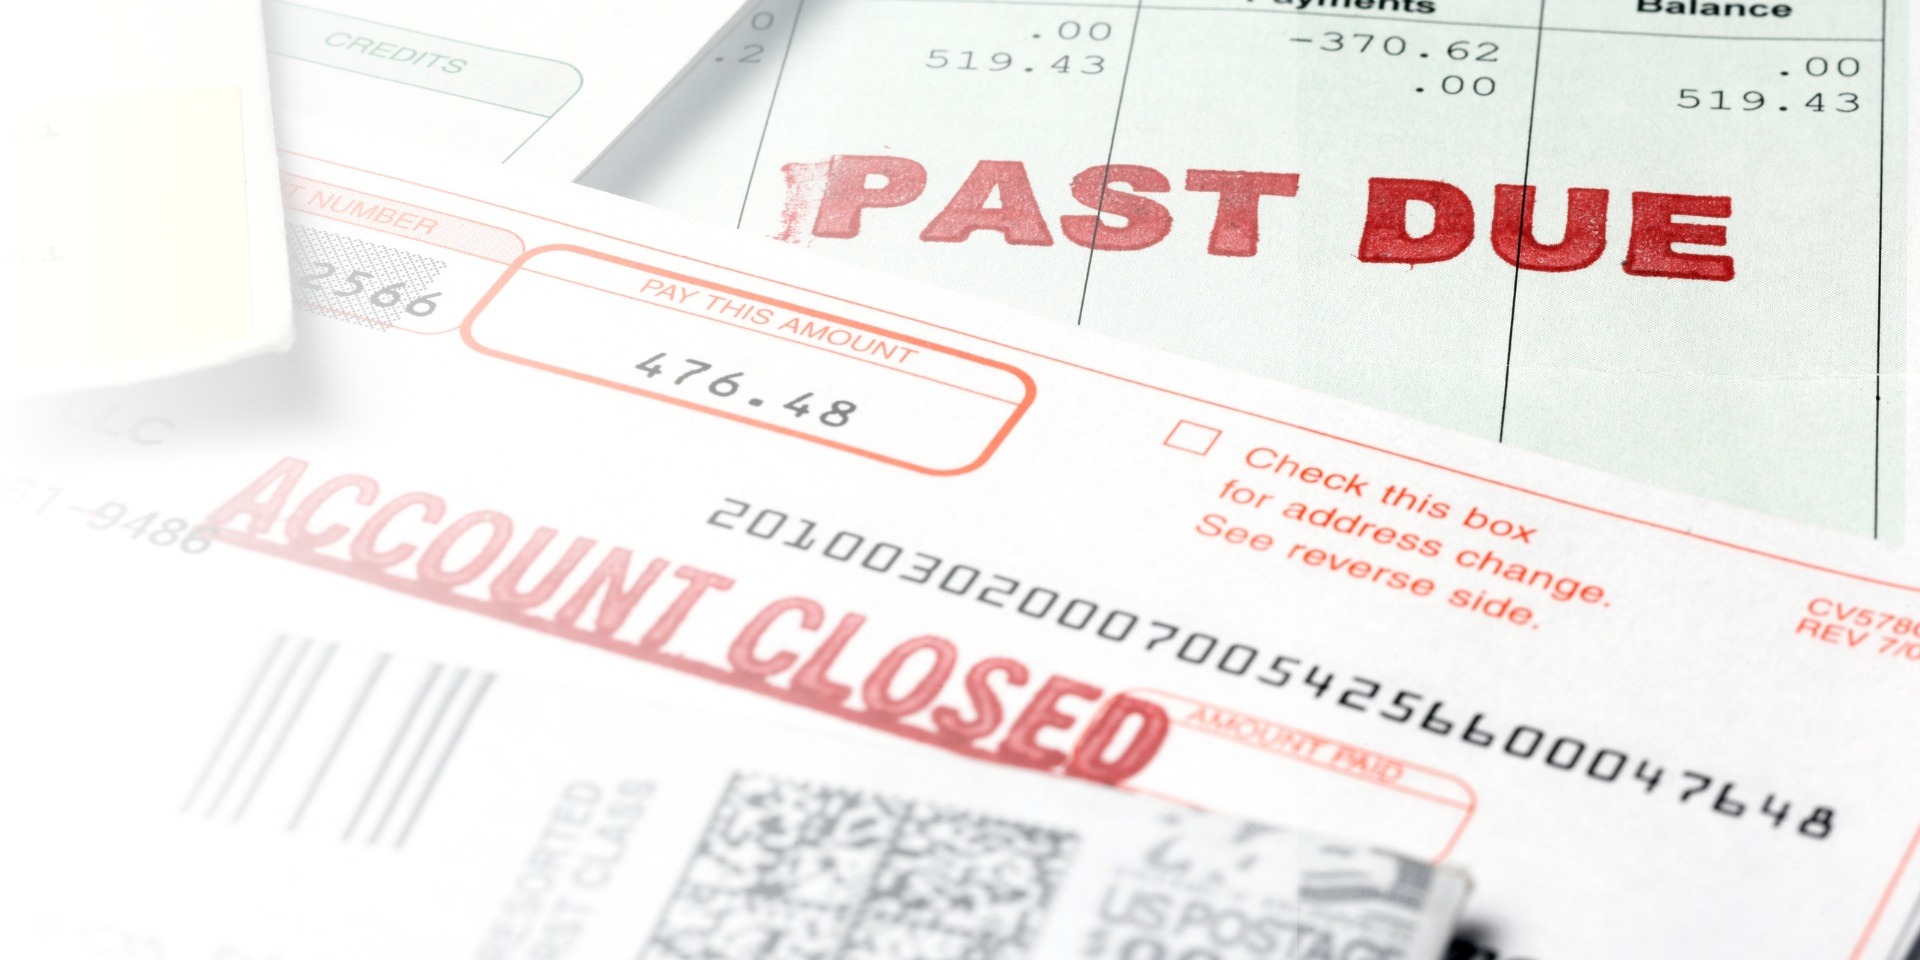 Major Changes to Fair Debt Collection Practices Act and How They Apply to Your Credit Union